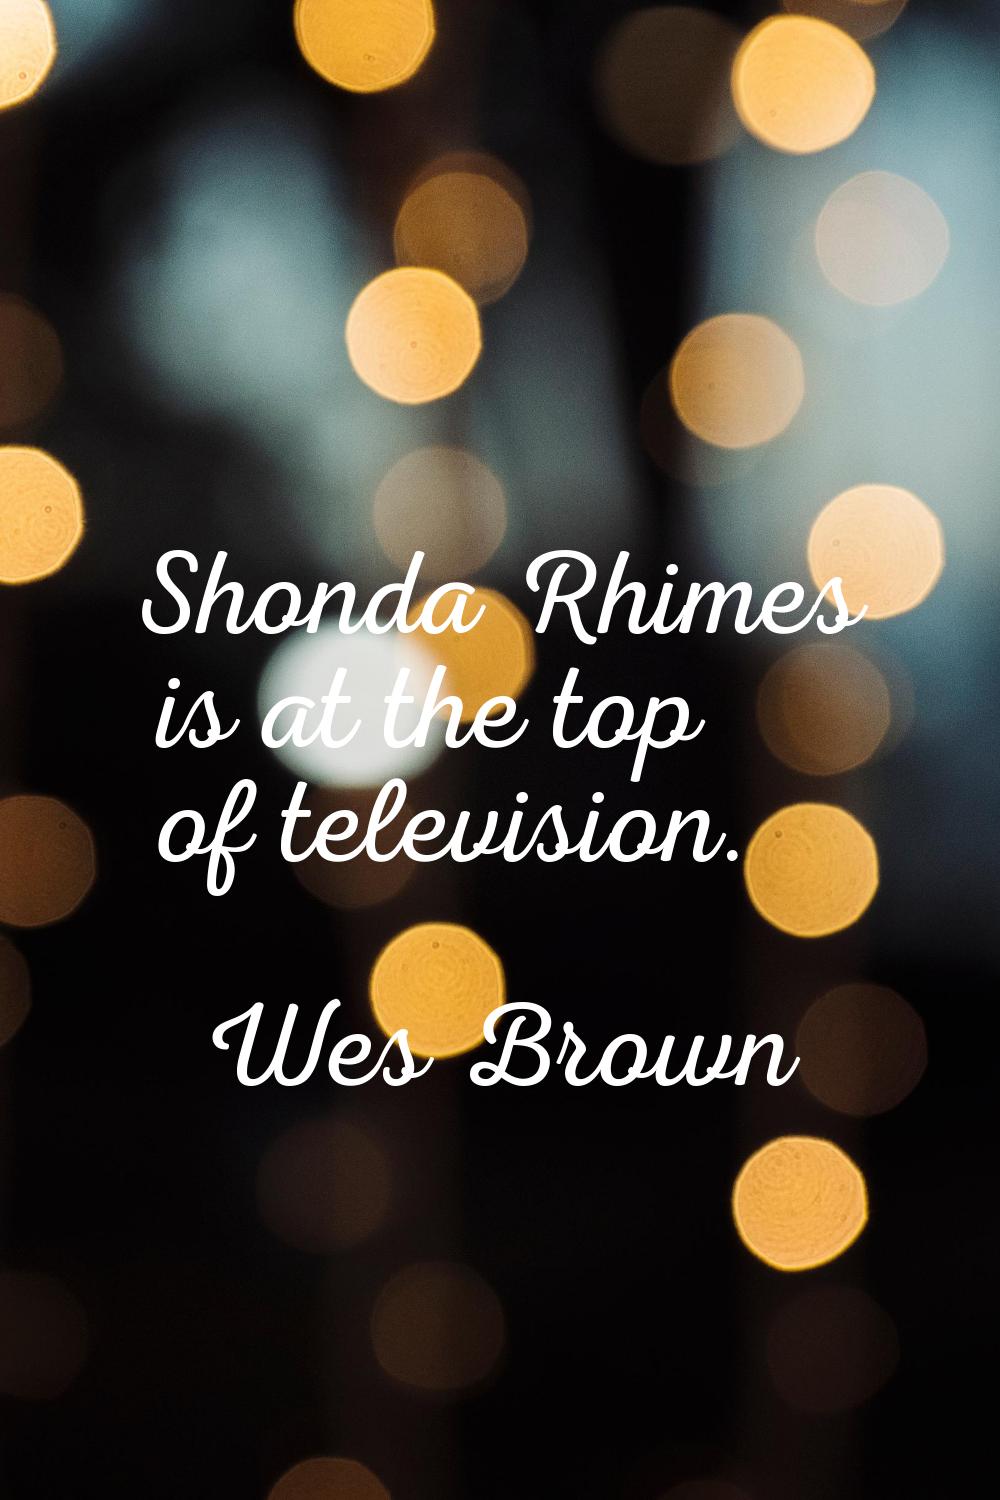 Shonda Rhimes is at the top of television.